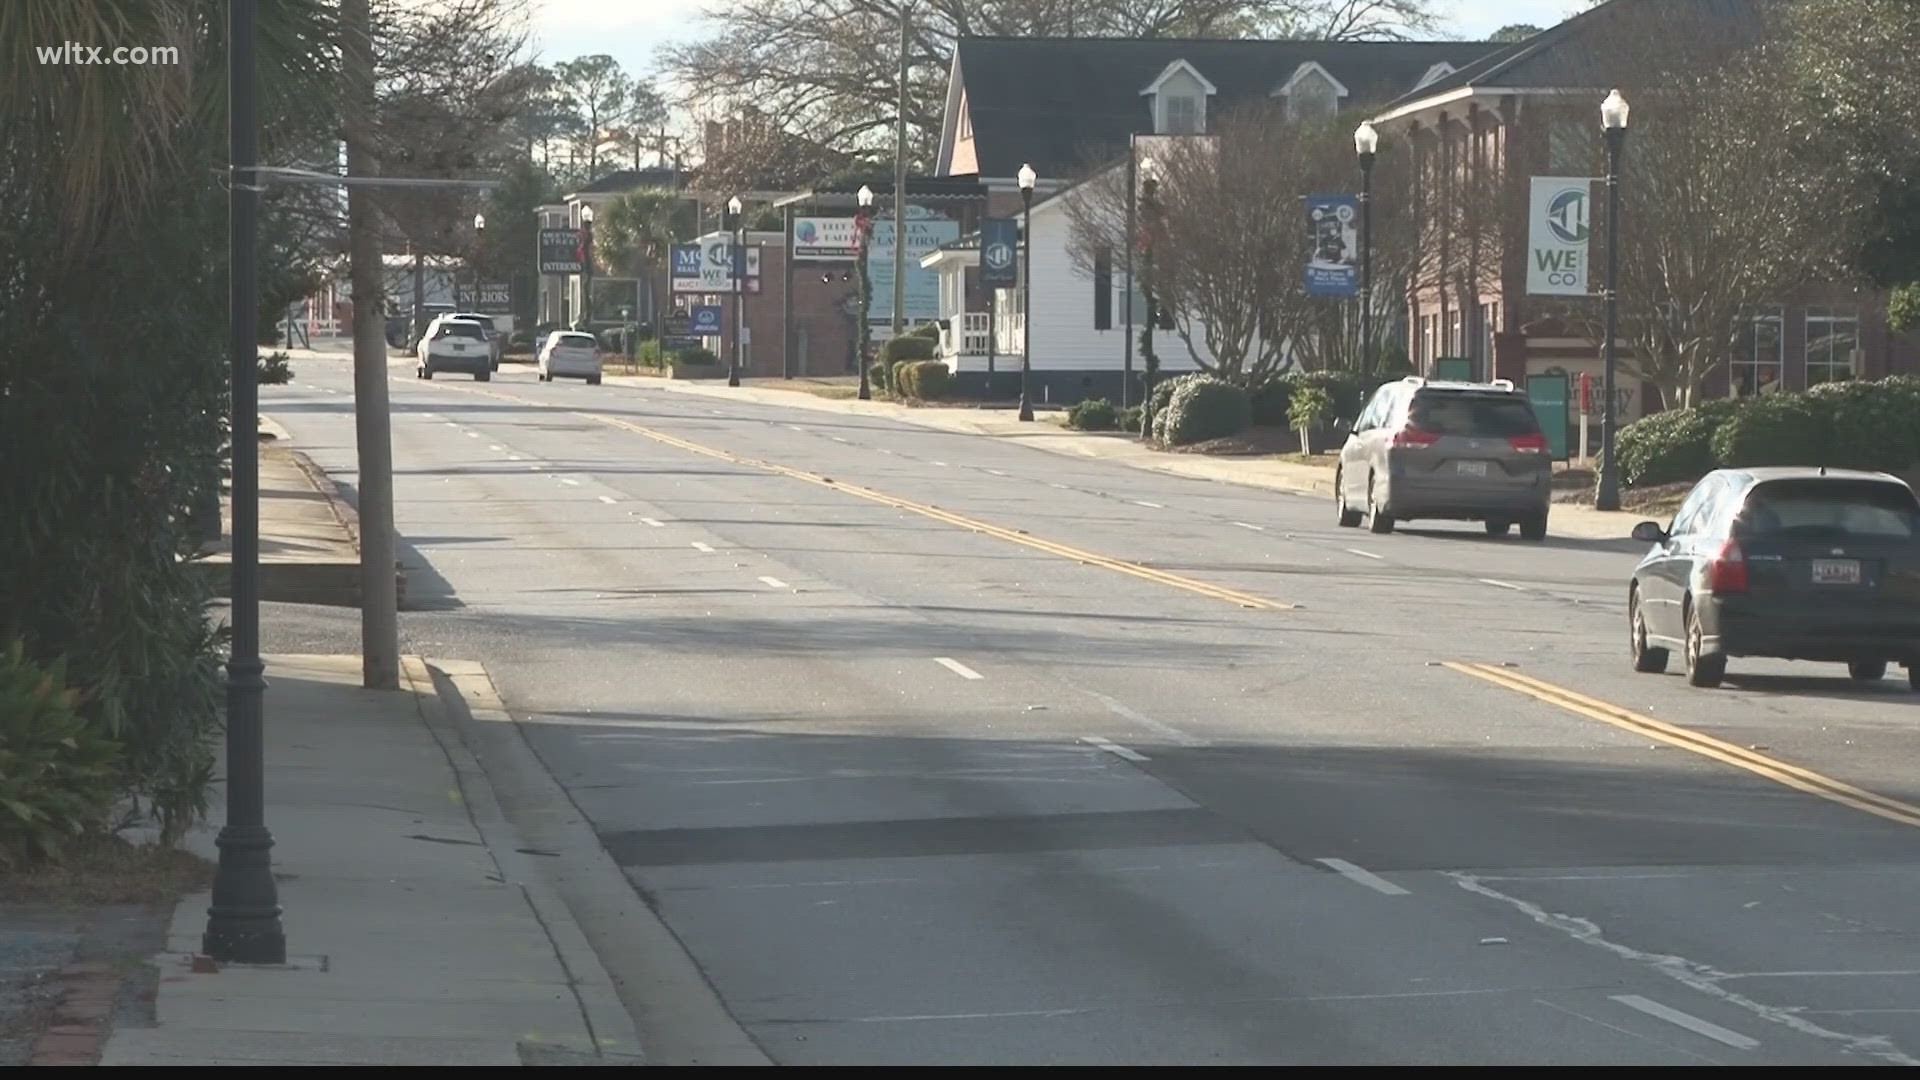 As an effort to continue development in West Columbia, the city is working to enhance safety along the Highway One corridor.